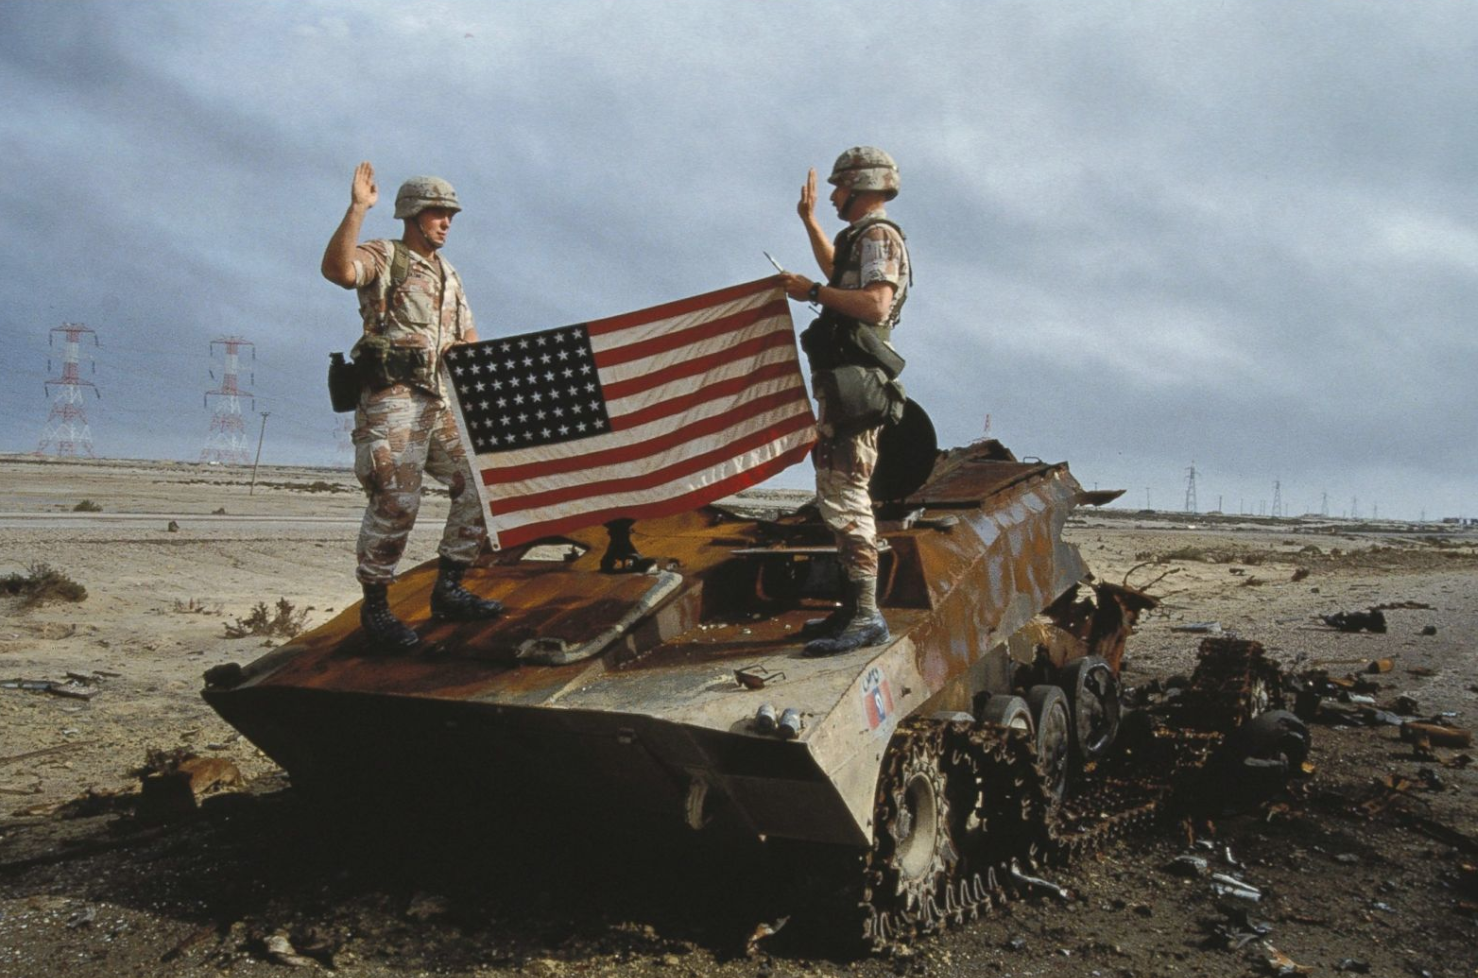 Iranian fanatics tried to spark a war with the US during Desert Storm